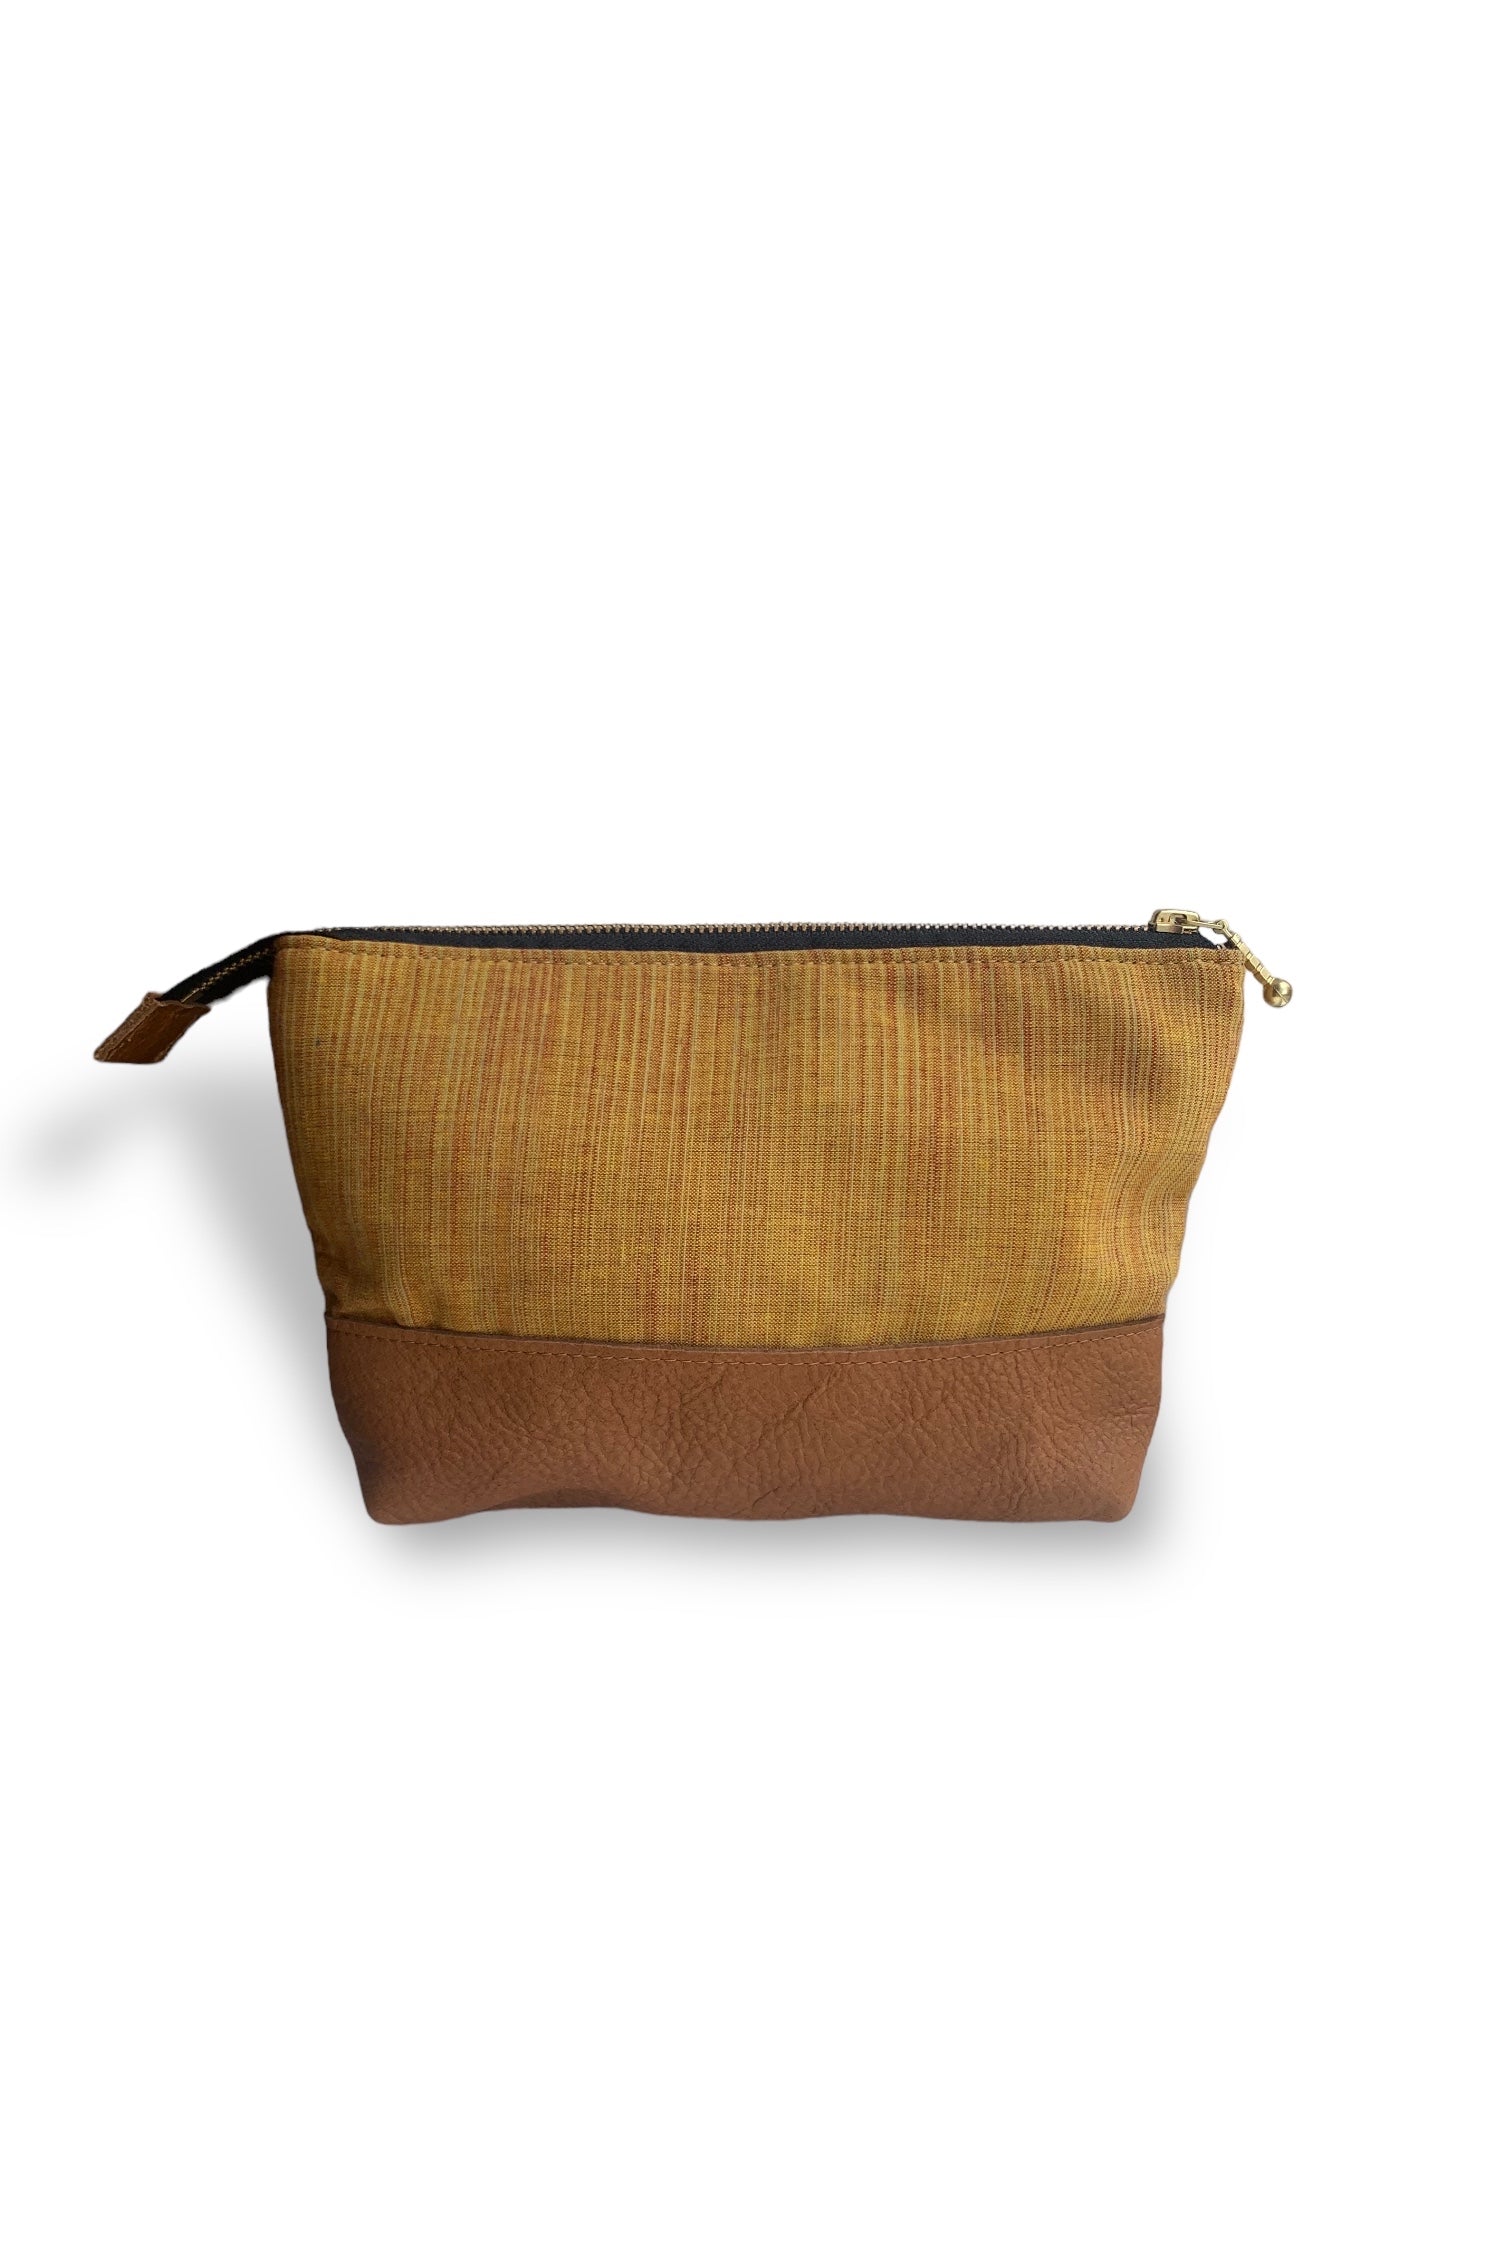 La Trousse - Leather and Fabric Pouch